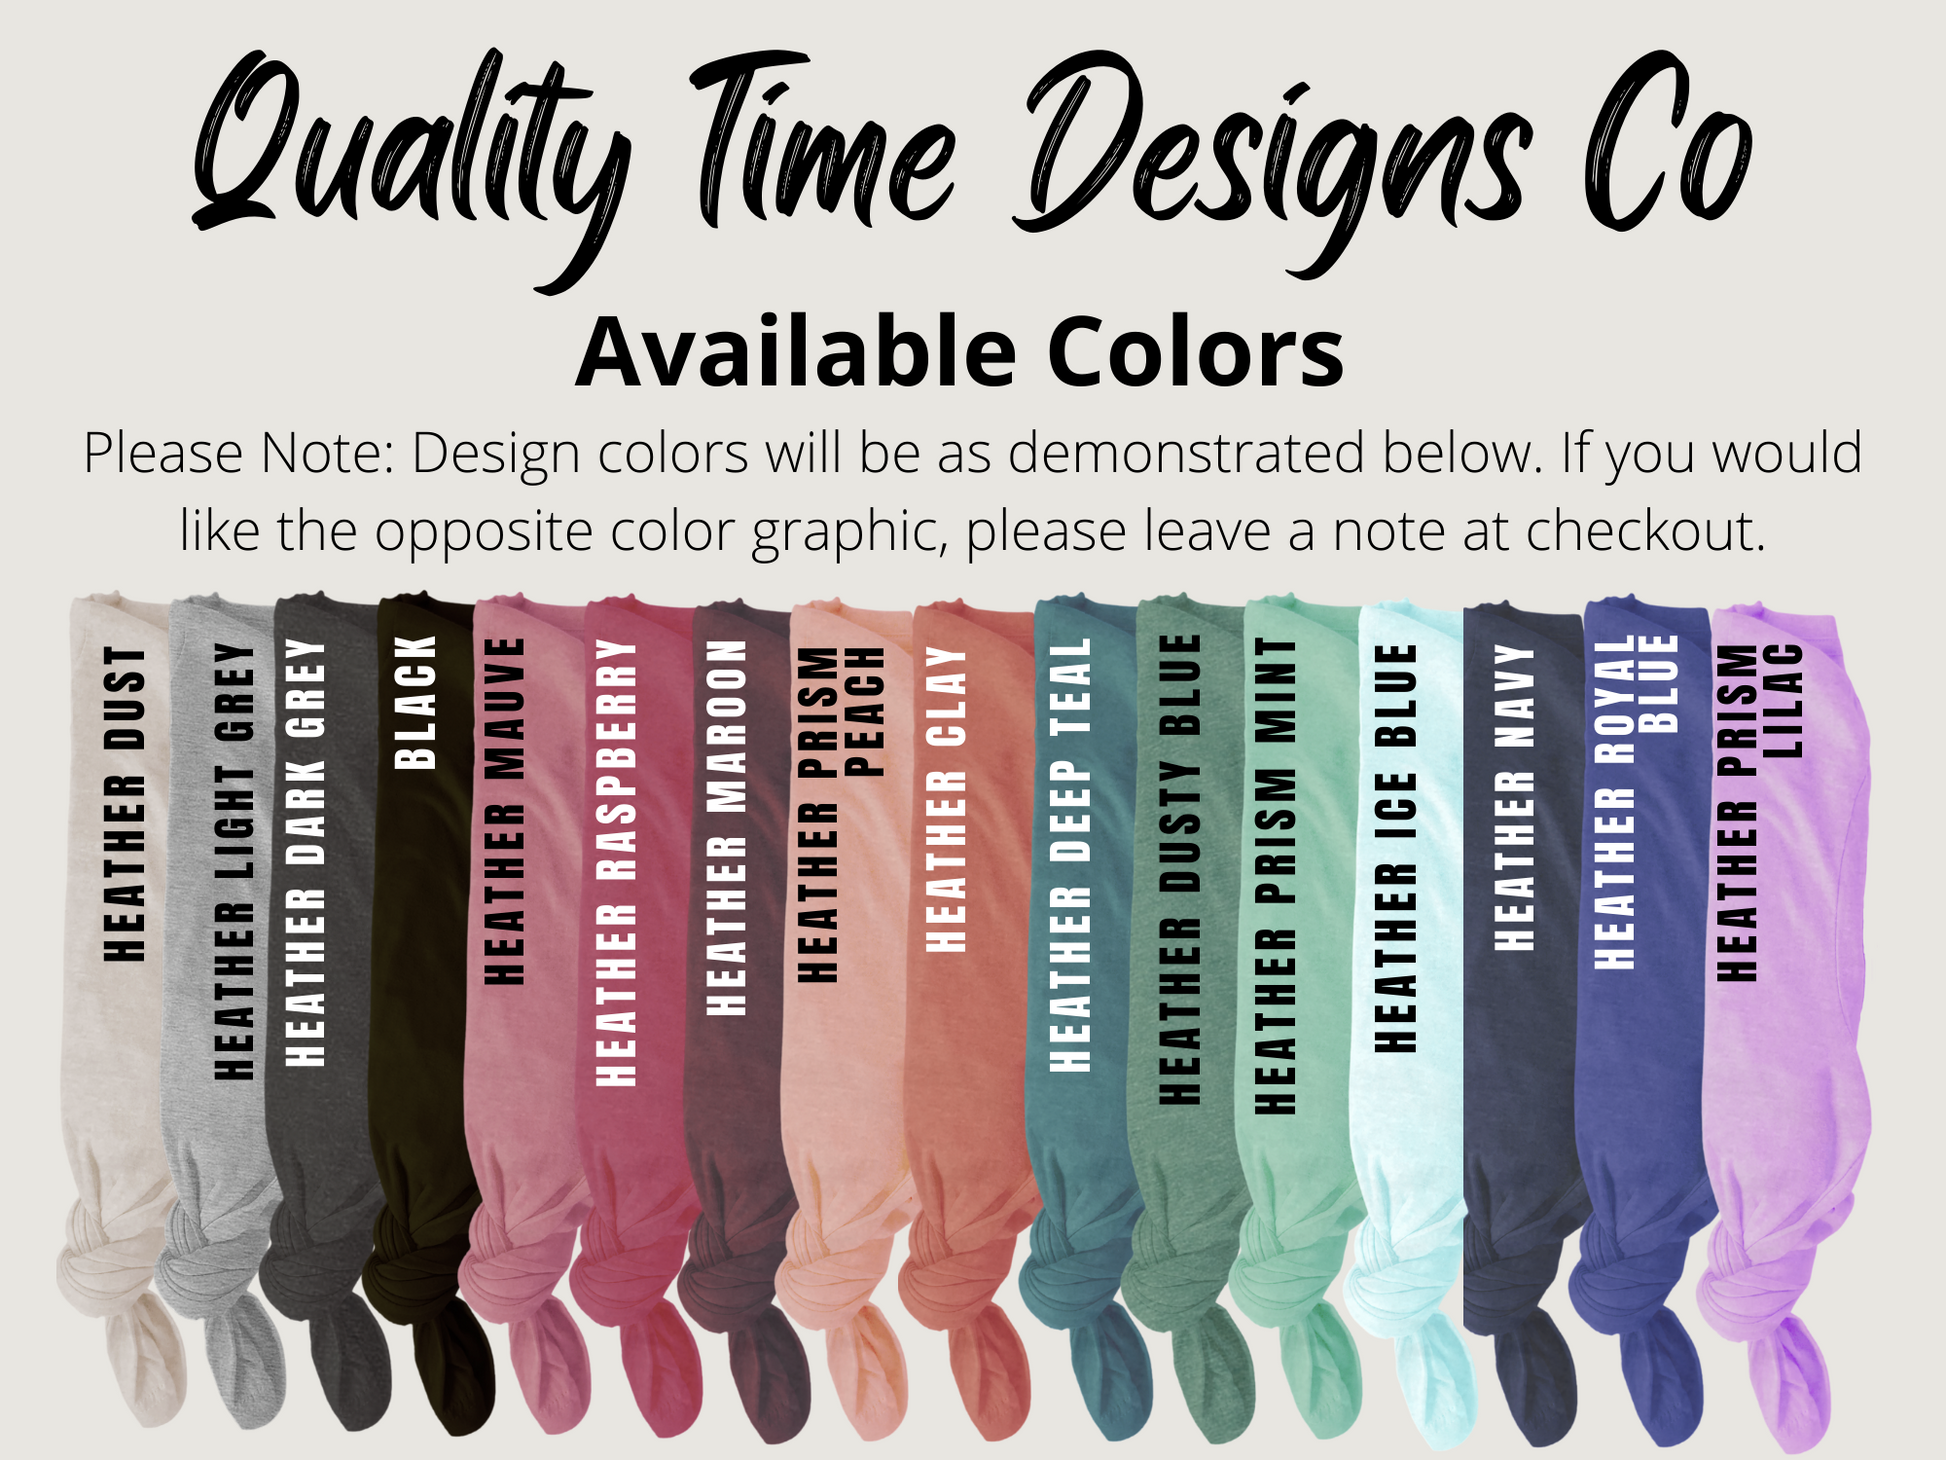 Quality Time Designs Co available colors